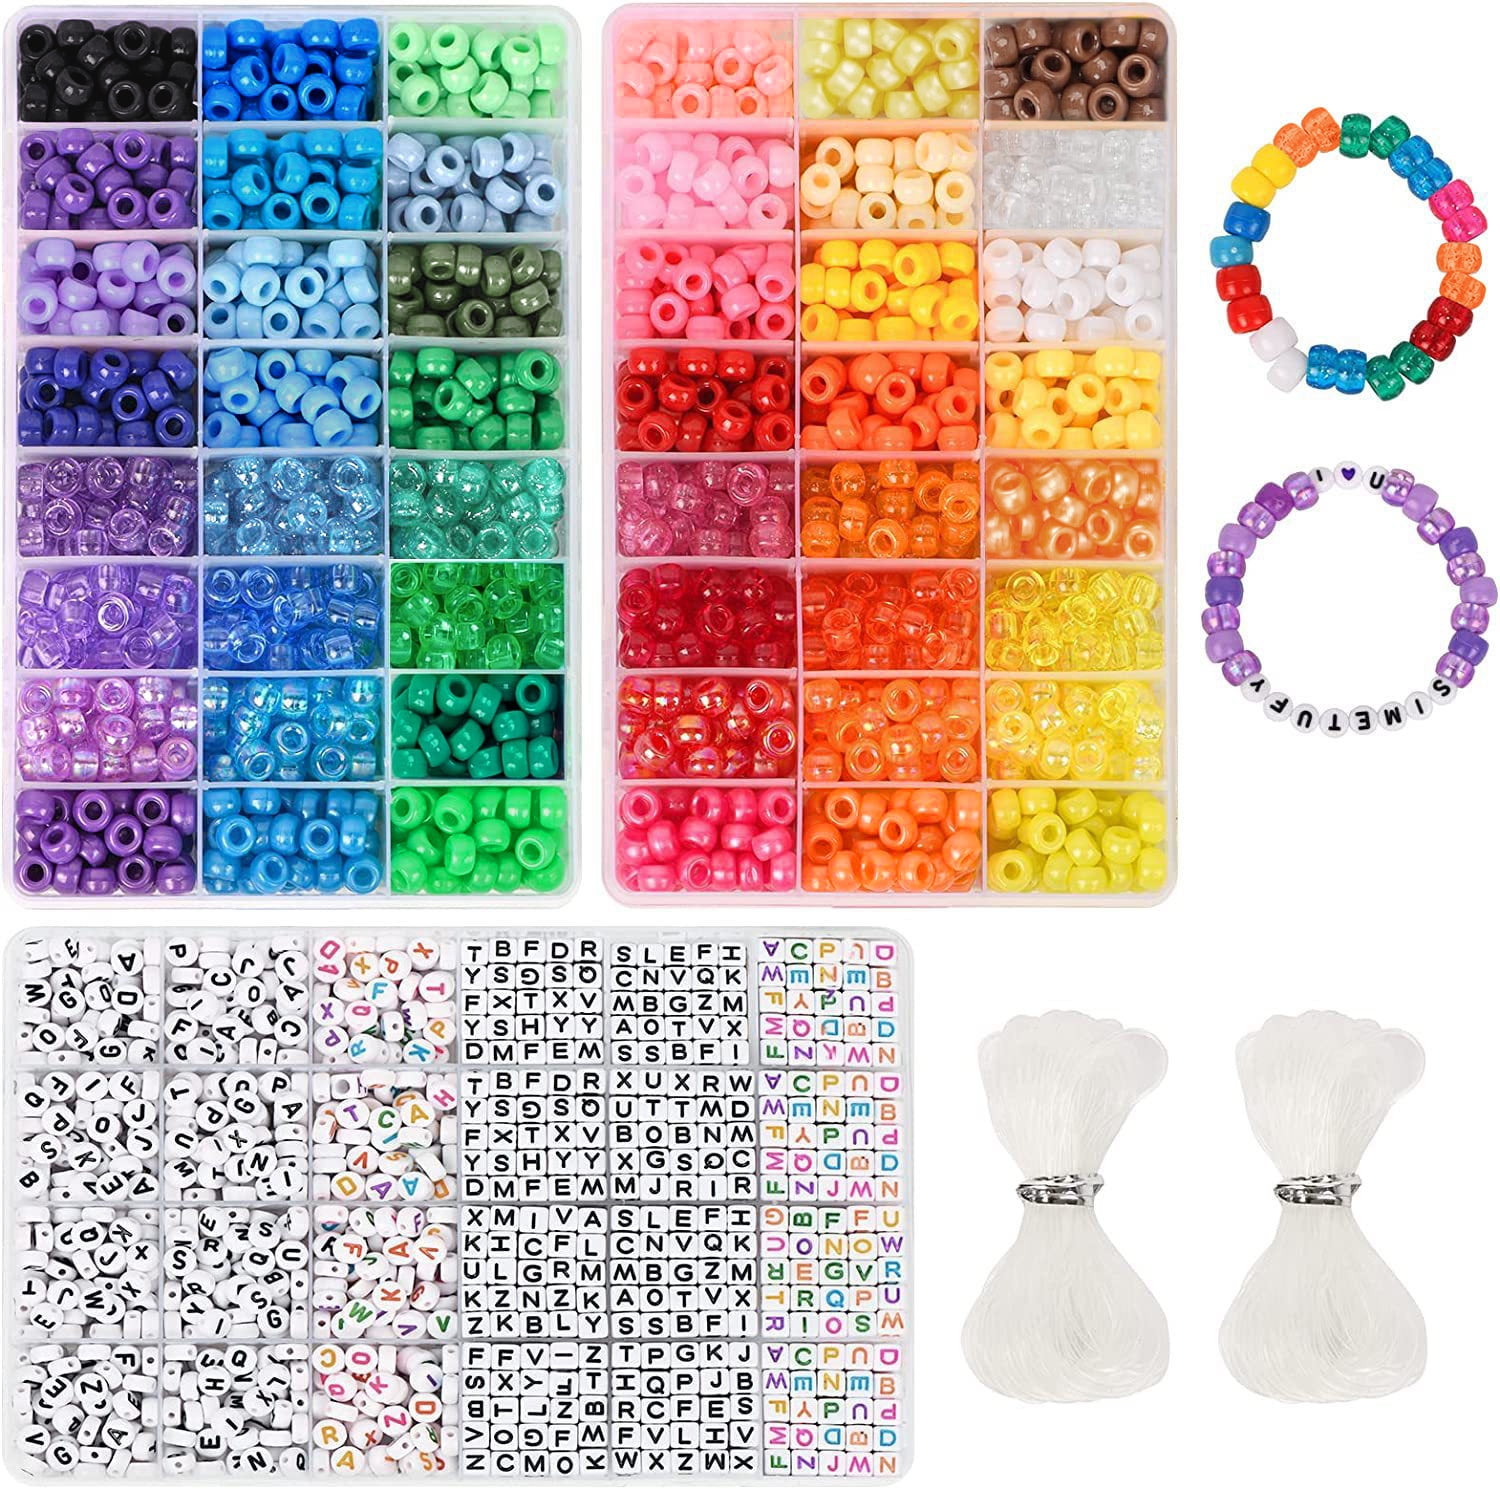 Funtopia 3mm 21600pcs+ Seed Beads for Jewelry Making, 60 Colors Small Glass  Beads for Bracelets, Friendship Bracelet Kit with Alphabet Letter Beads 